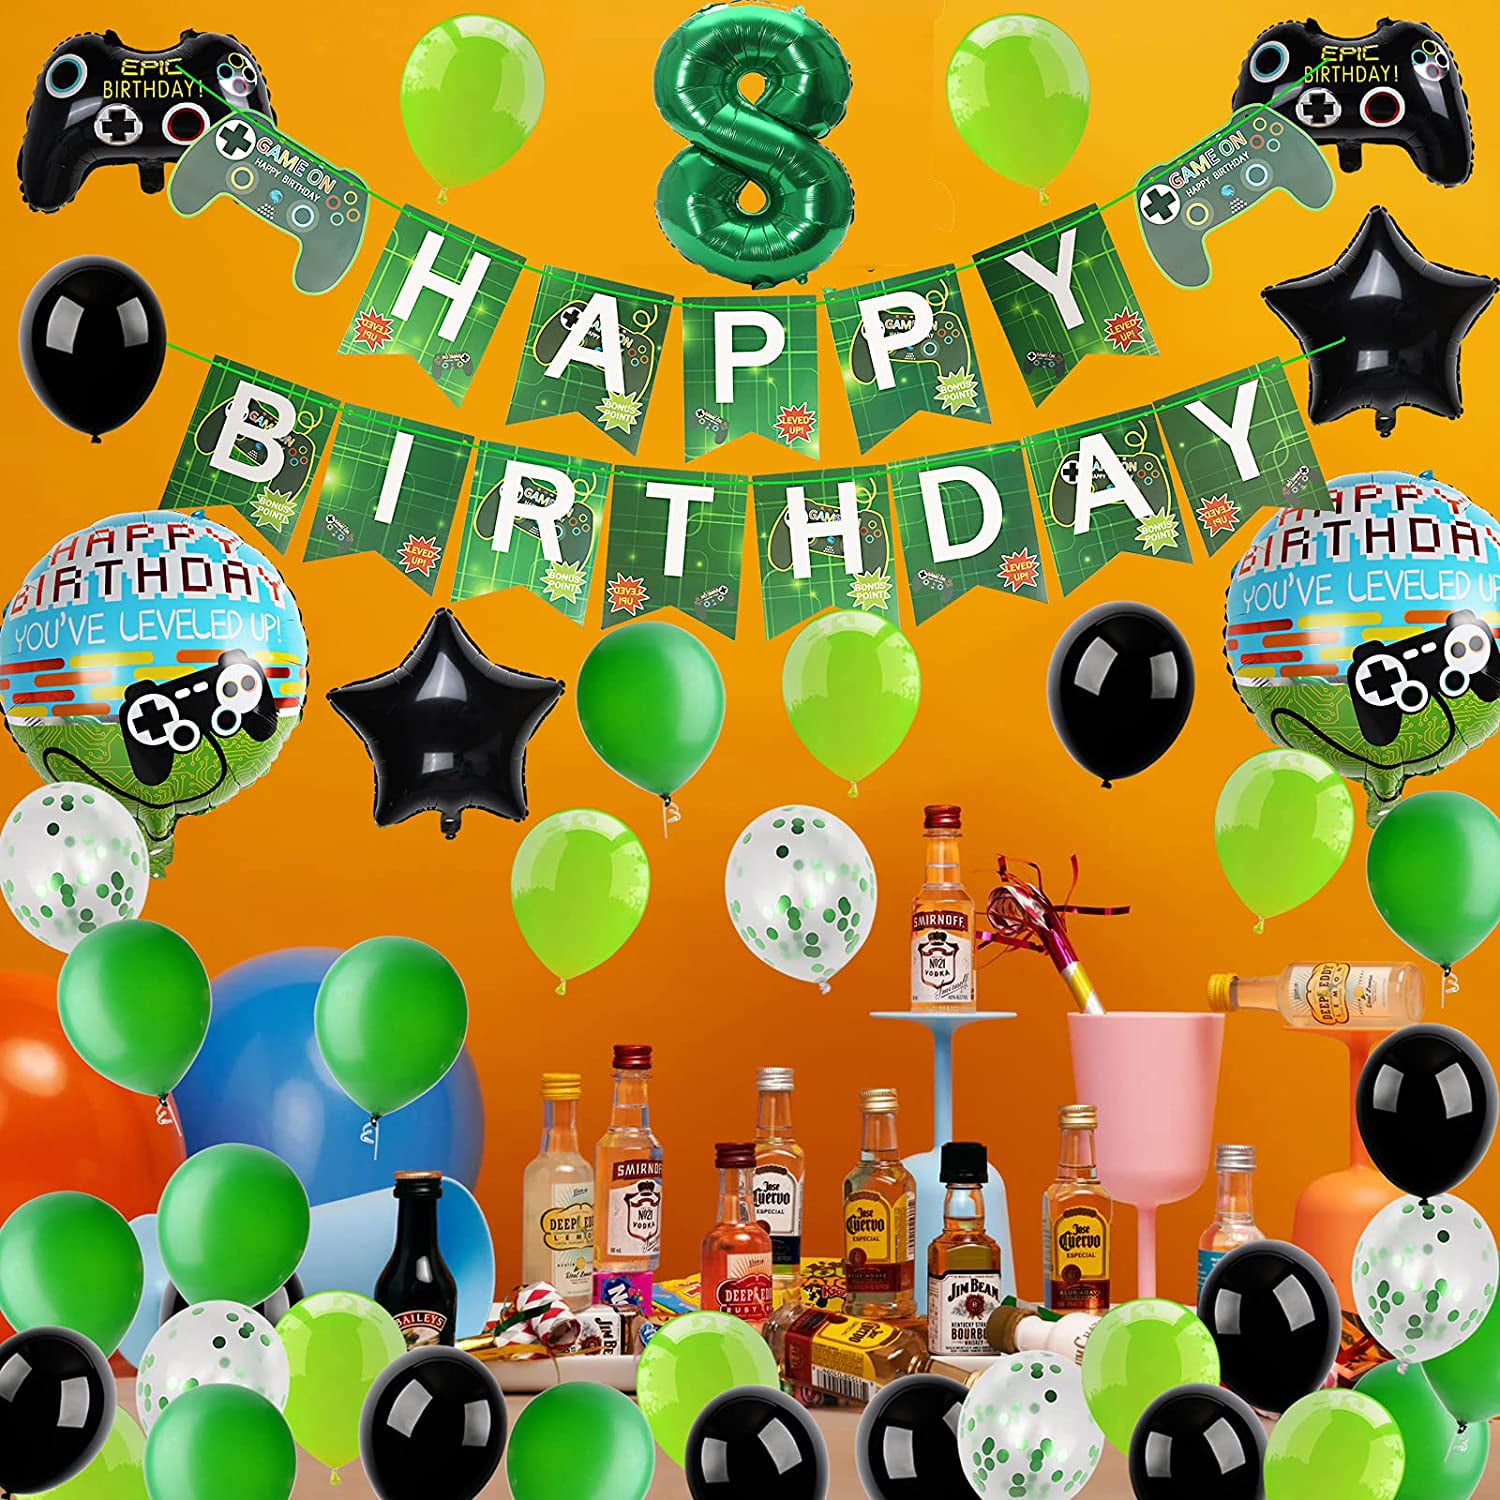 5th Party Supplies Decorations,53 PCS Video Game Party Supplies,Including Gaming Banner Green Balloons for Boys Kids Birthday Decorations